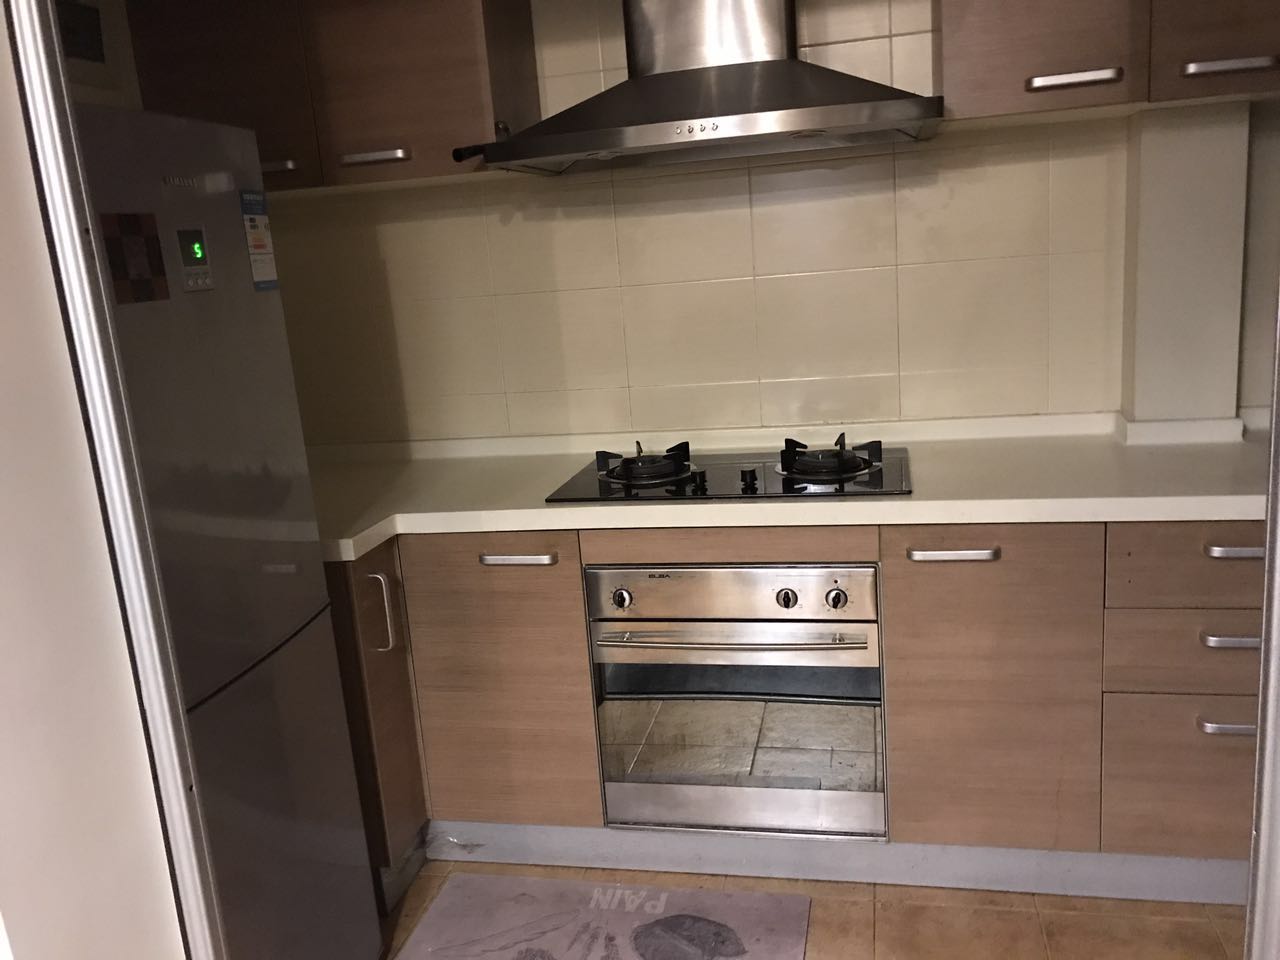 good condition apartment for rent shanghai Spacious and well maintained (176sqm) 3bedroom apartment near Nanjing W Rd in Ladoll for rent